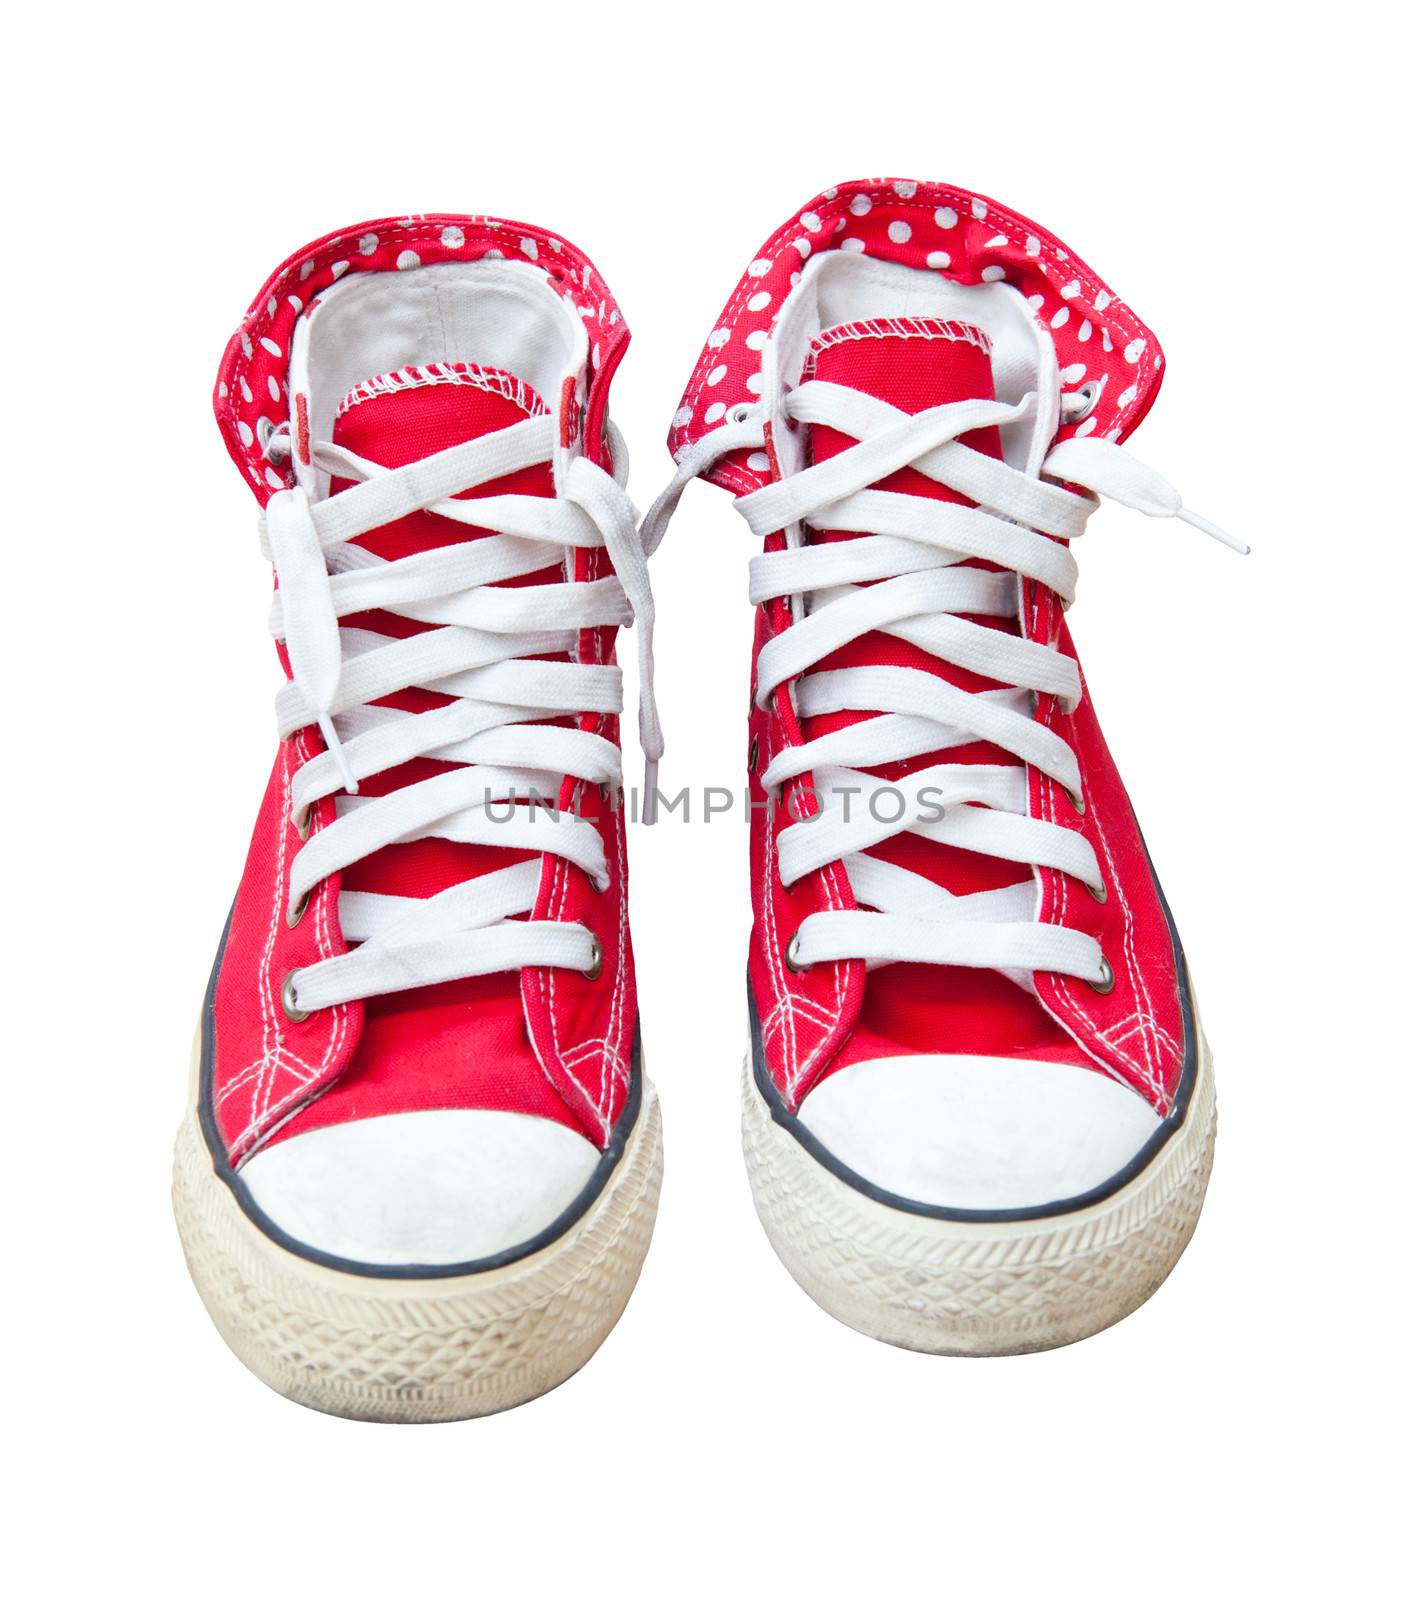 old red sneaker isolated on white background by khunaspix